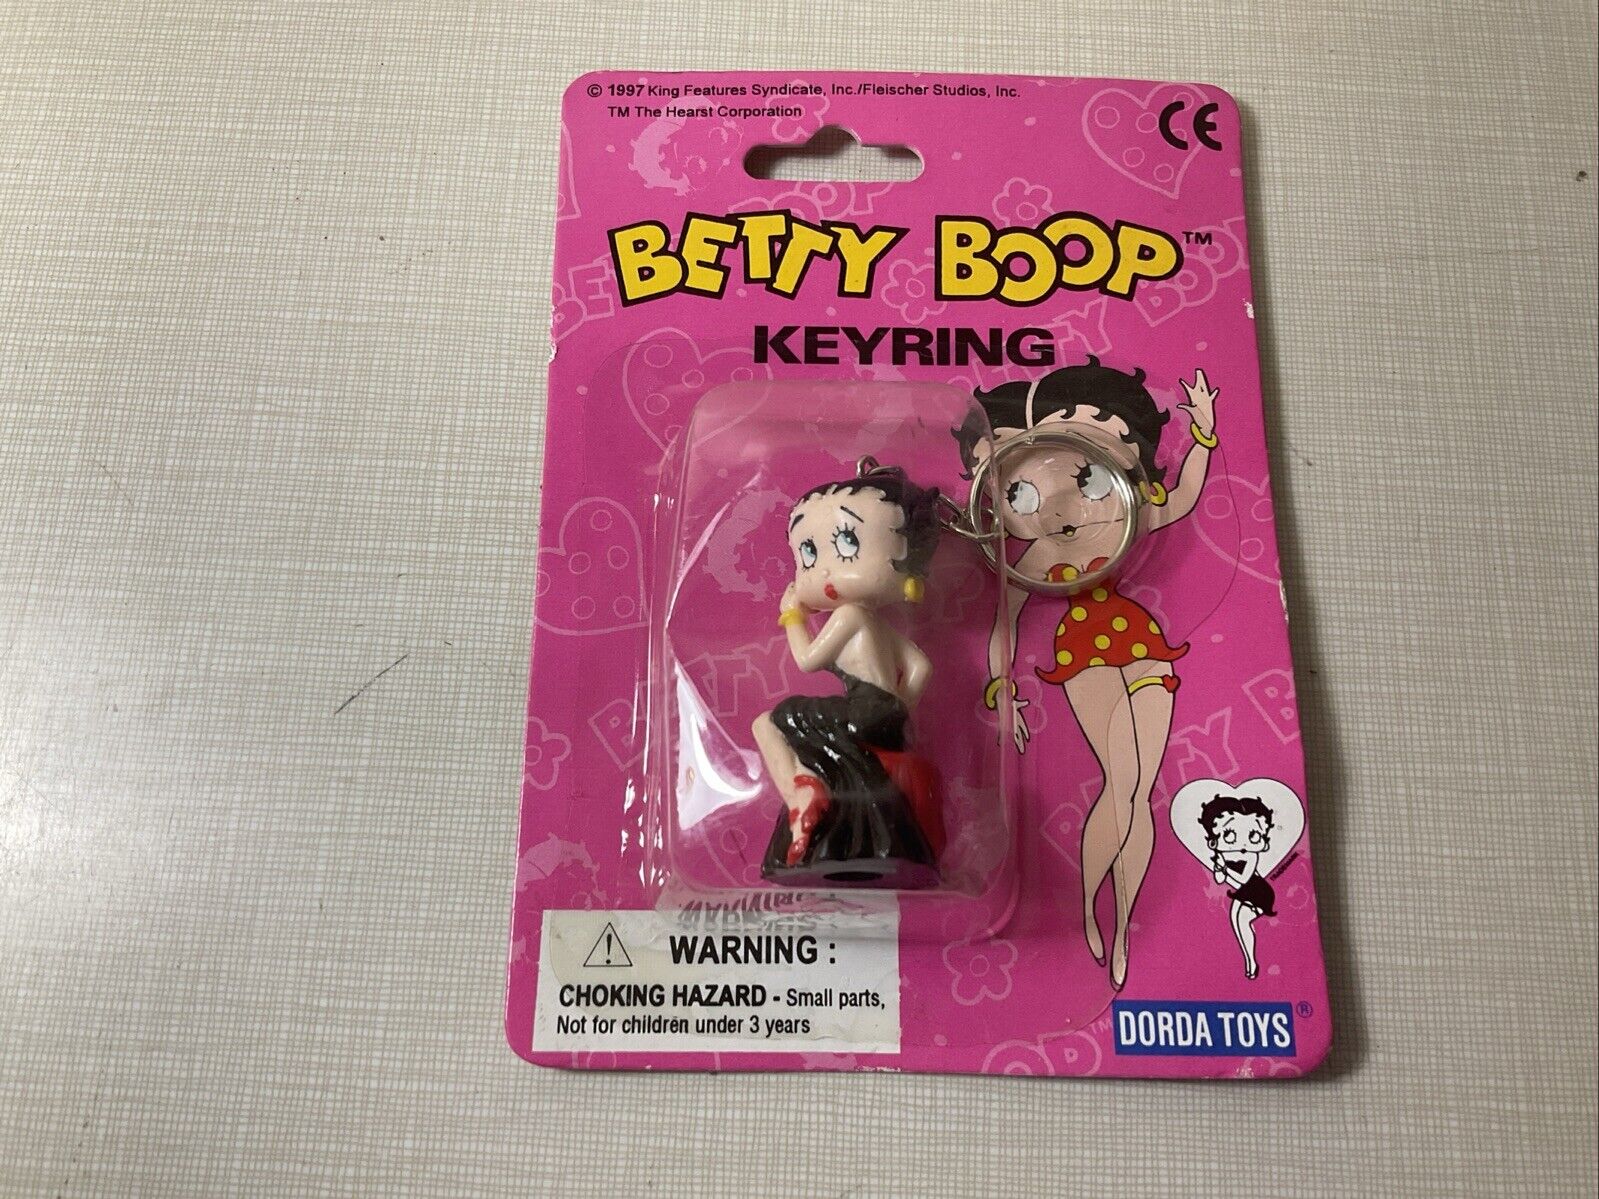 1997 Betty Boop Keyring - Little Black Dress and Red Heels by King Features